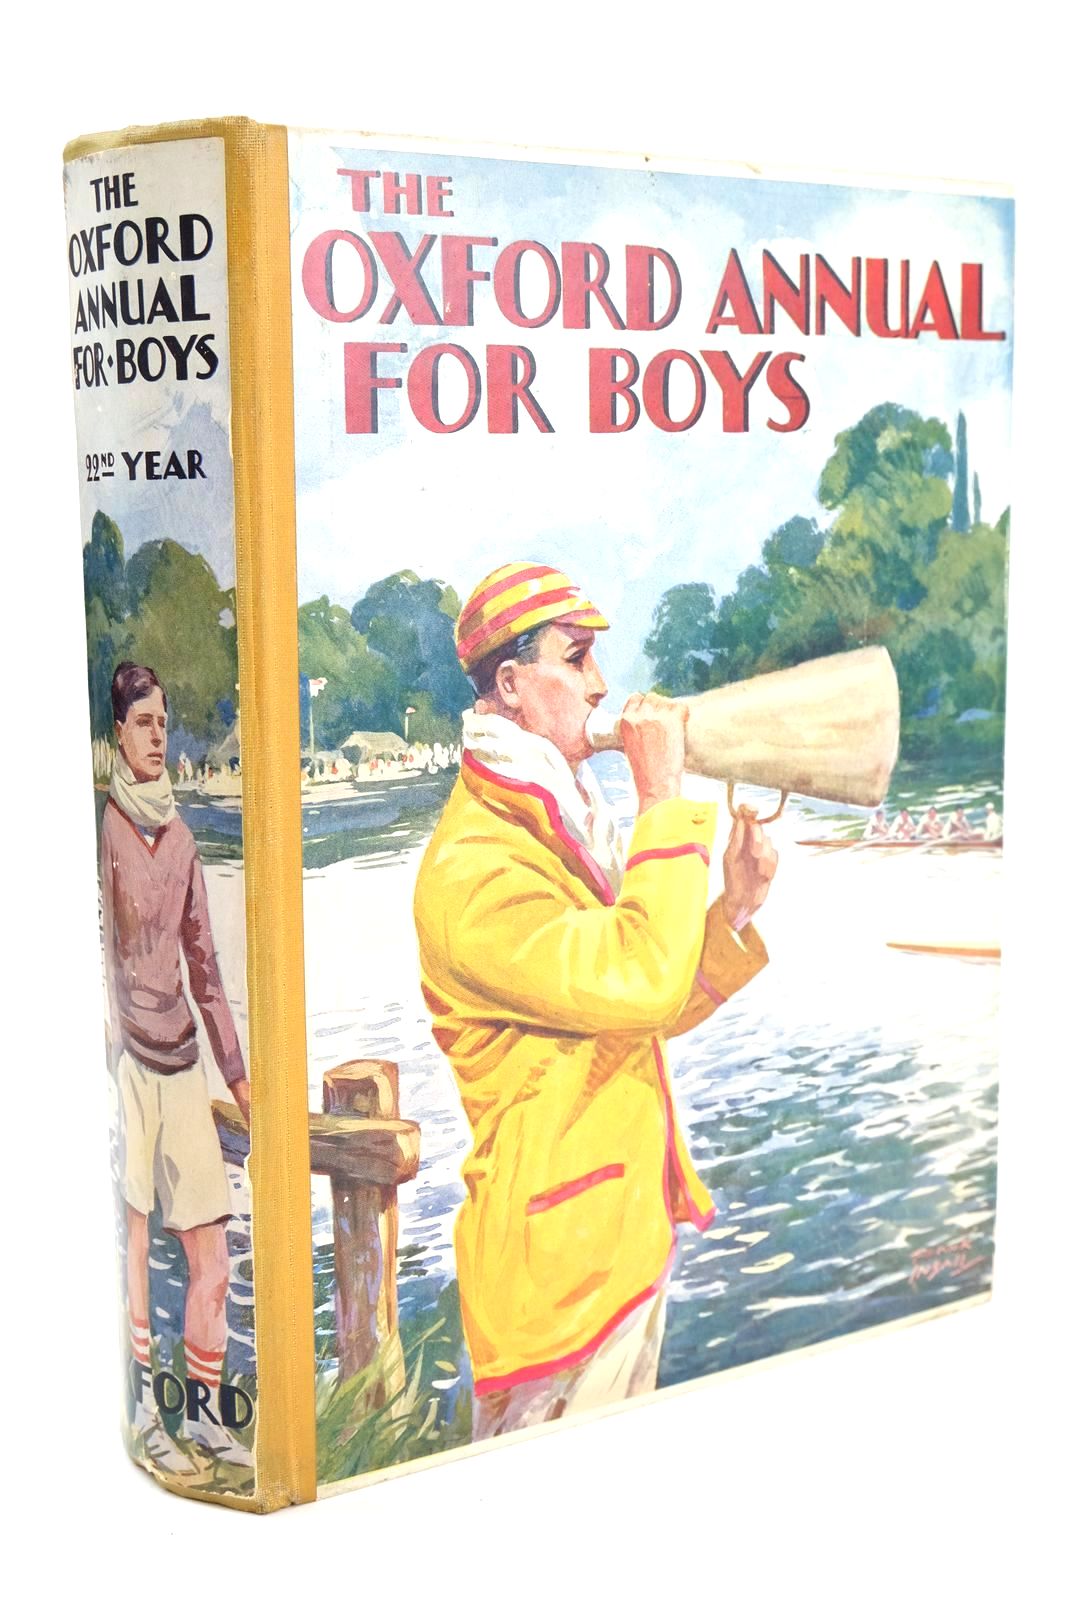 Photo of THE OXFORD ANNUAL FOR BOYS 22ND YEAR written by Strang, Herbert Hope, G.A. Hadath, Gunby Bird, Richard et al, illustrated by Mackinlay, Miguel Elcock, Howard K. Insall, Frank Cuneo, T. et al., published by Oxford University Press, Humphrey Milford (STOCK CODE: 1324971)  for sale by Stella & Rose's Books